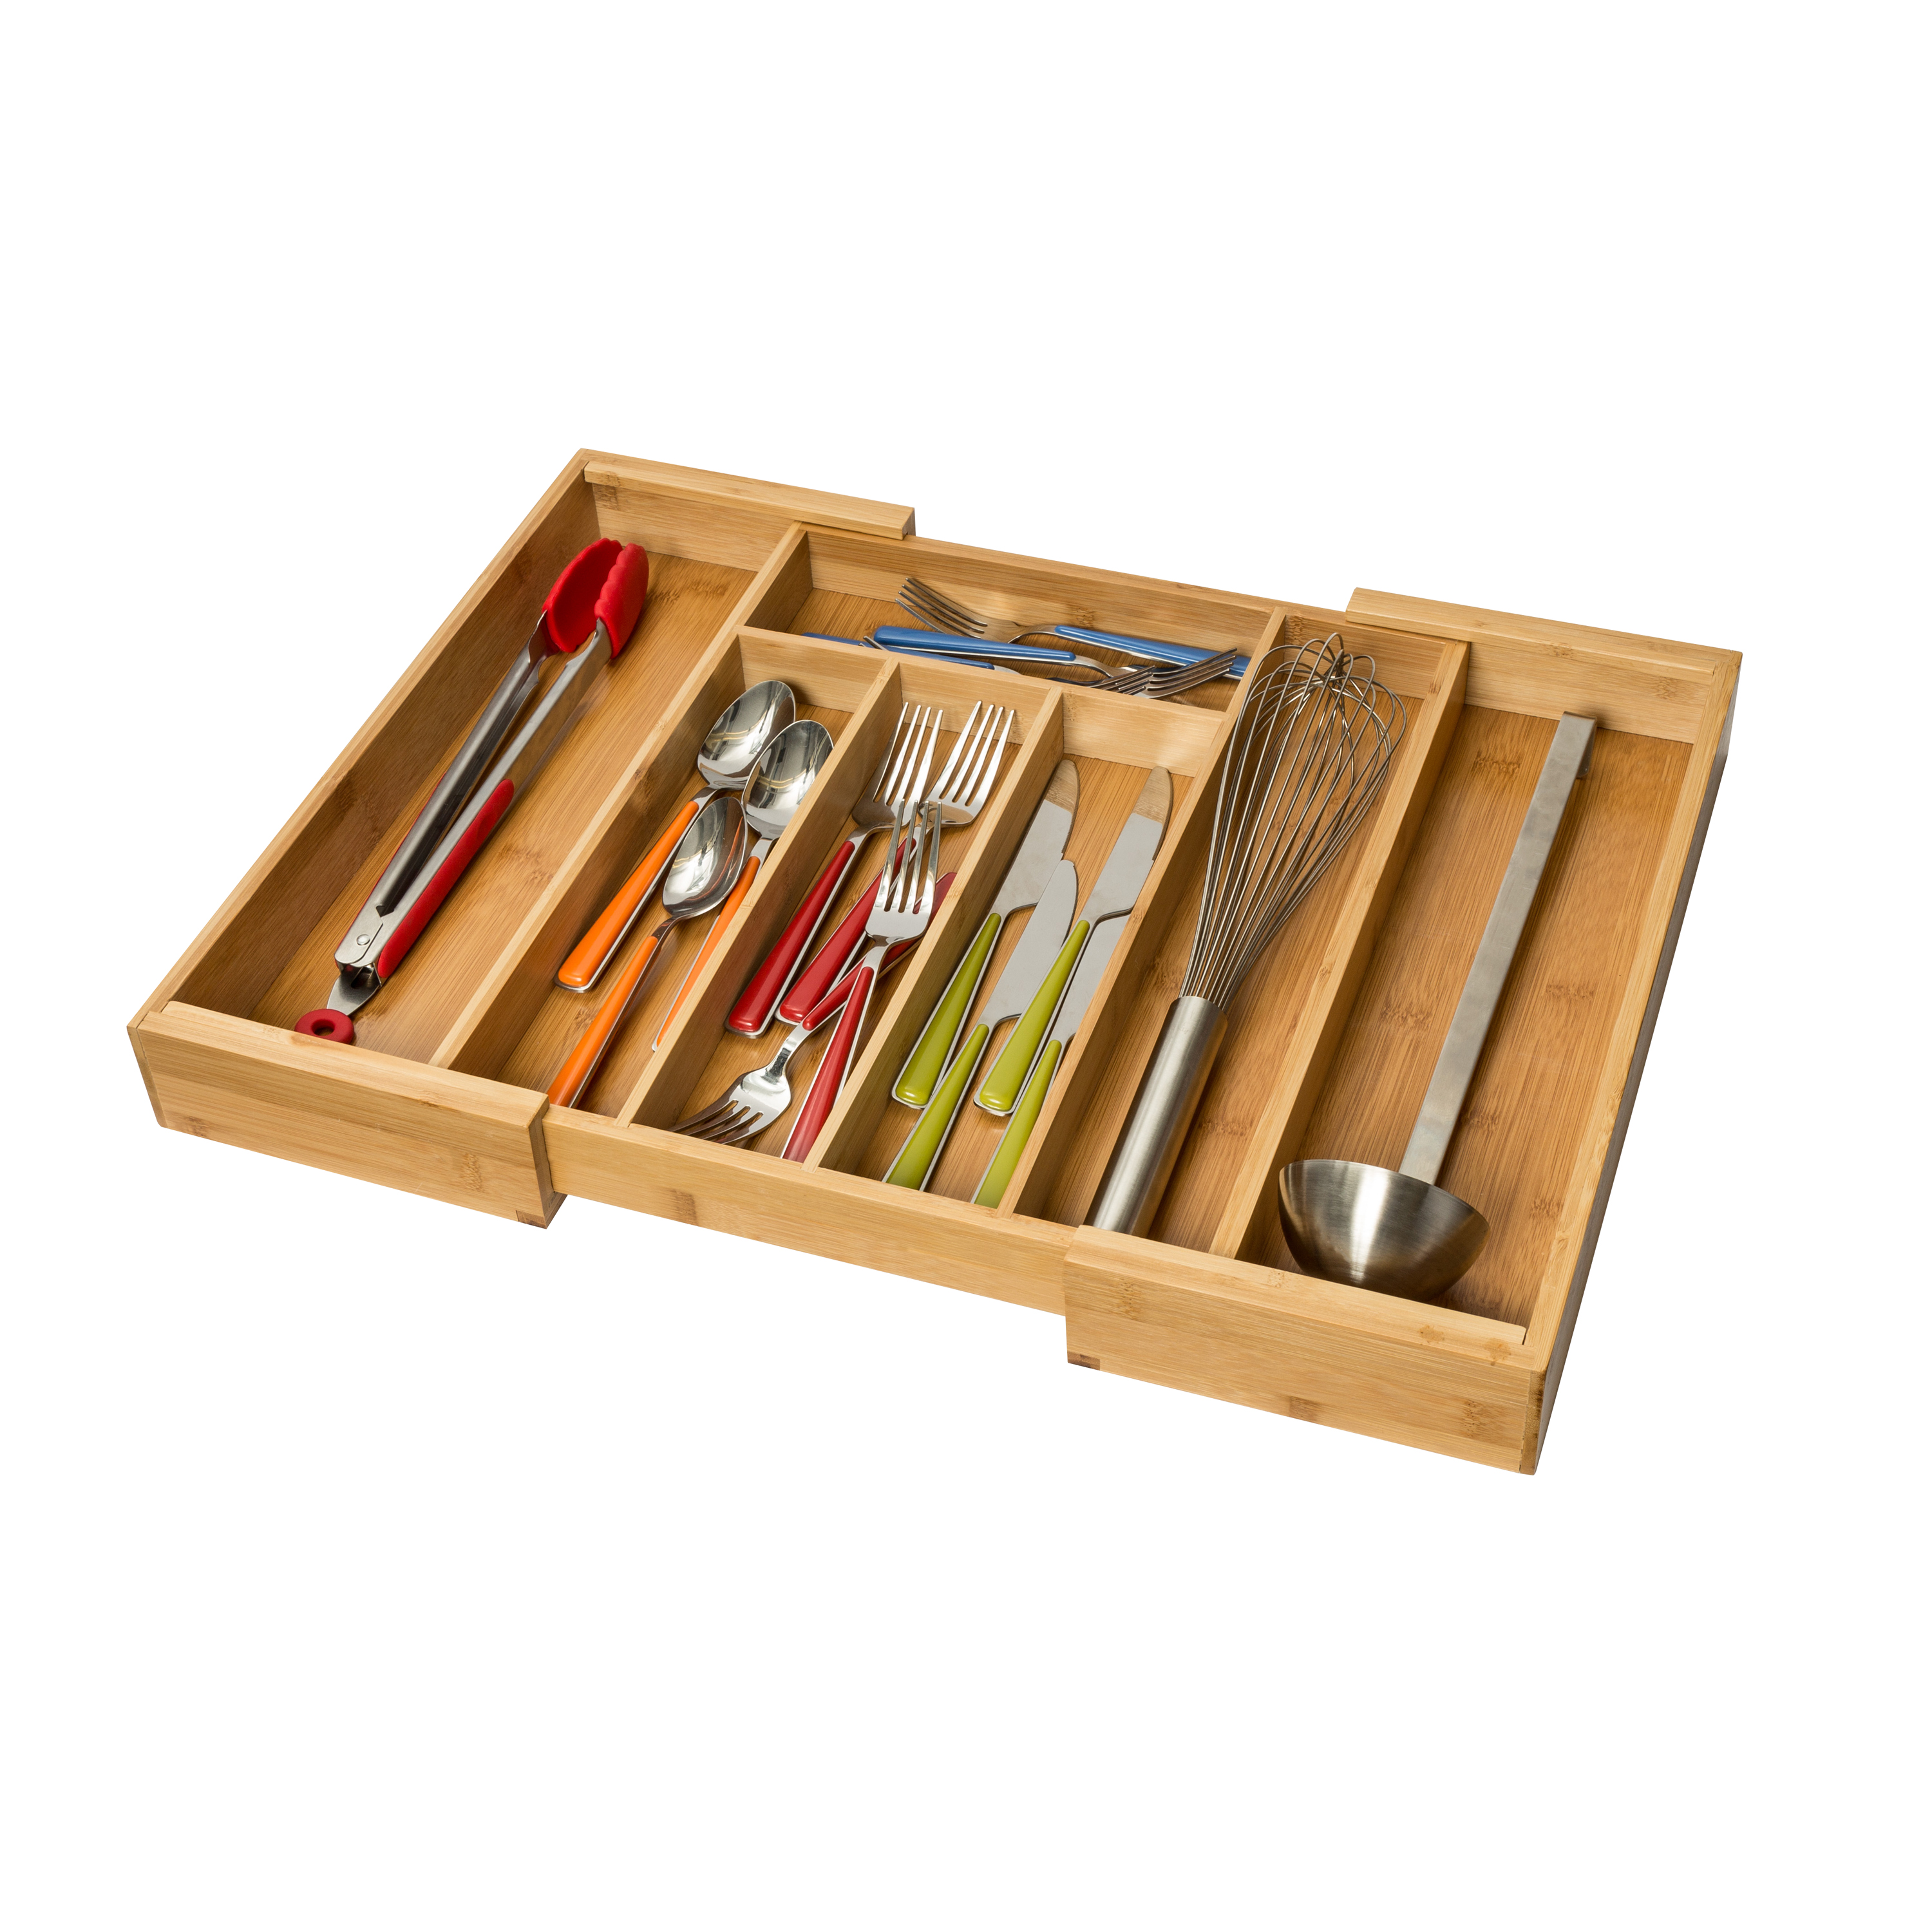 Honey-Can-Do Bamboo 17" D x 22.75" W x 2.3" 7-Compartment Expandable Kitchen Drawer Organizer, Natural - image 5 of 7